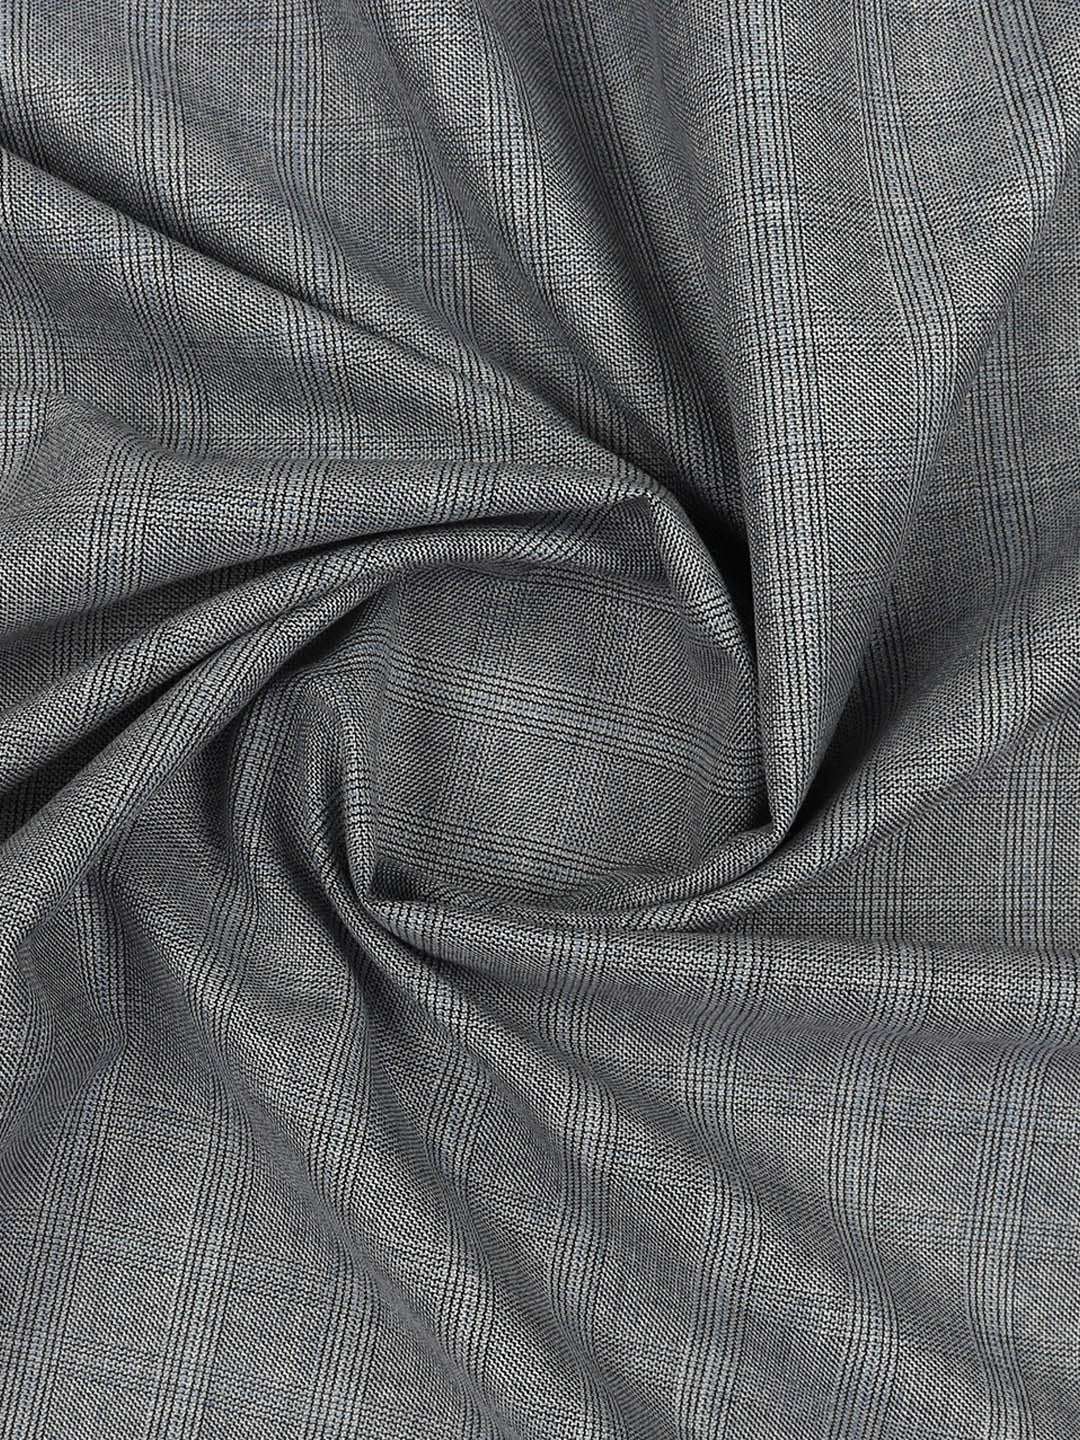 Cotton Smart Look Grey Checked Suiting Fabric-Enable Stretch